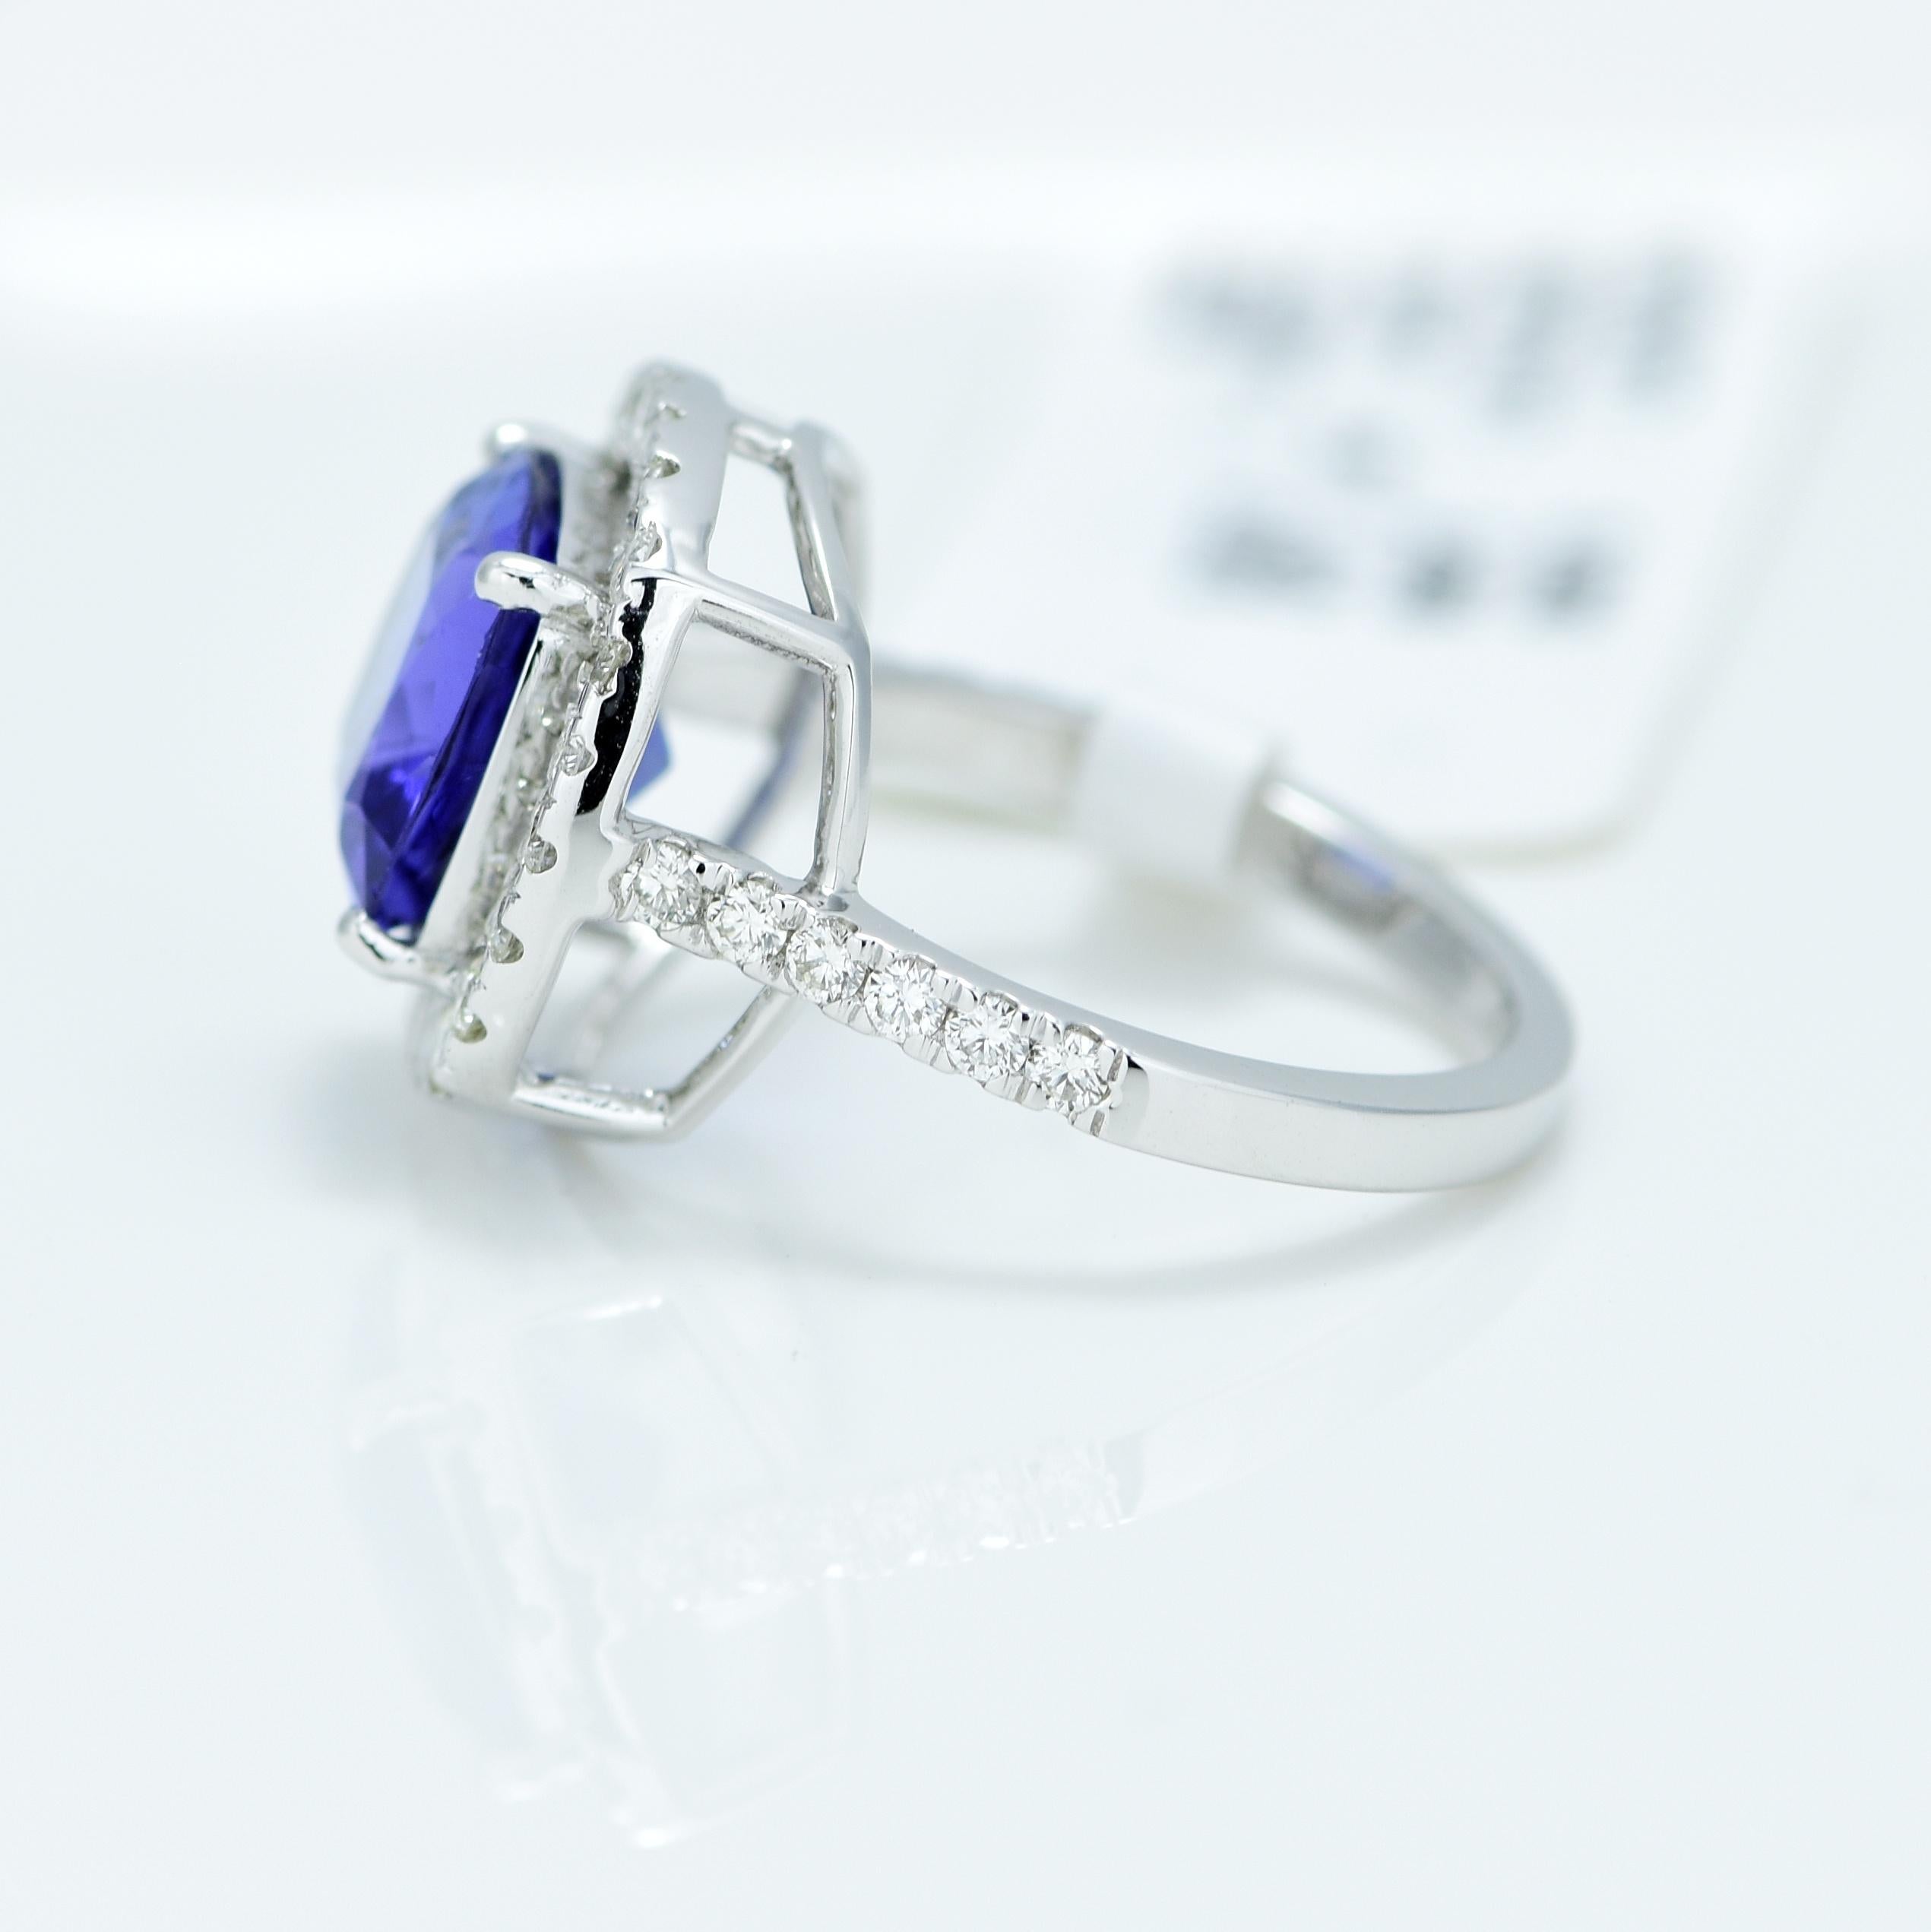 Stunning Violetish Blue Tanzanite and Diamond halo ring.

Centre Stone - Natural Tanzanite, 
Centre Stone Weight - 2.57 Carat, 
Centre Stone Shape & Cut - Square Cushion Step Cut
 
Total Number of Diamonds - 36, 
Diamonds Carat Weight - 0.61